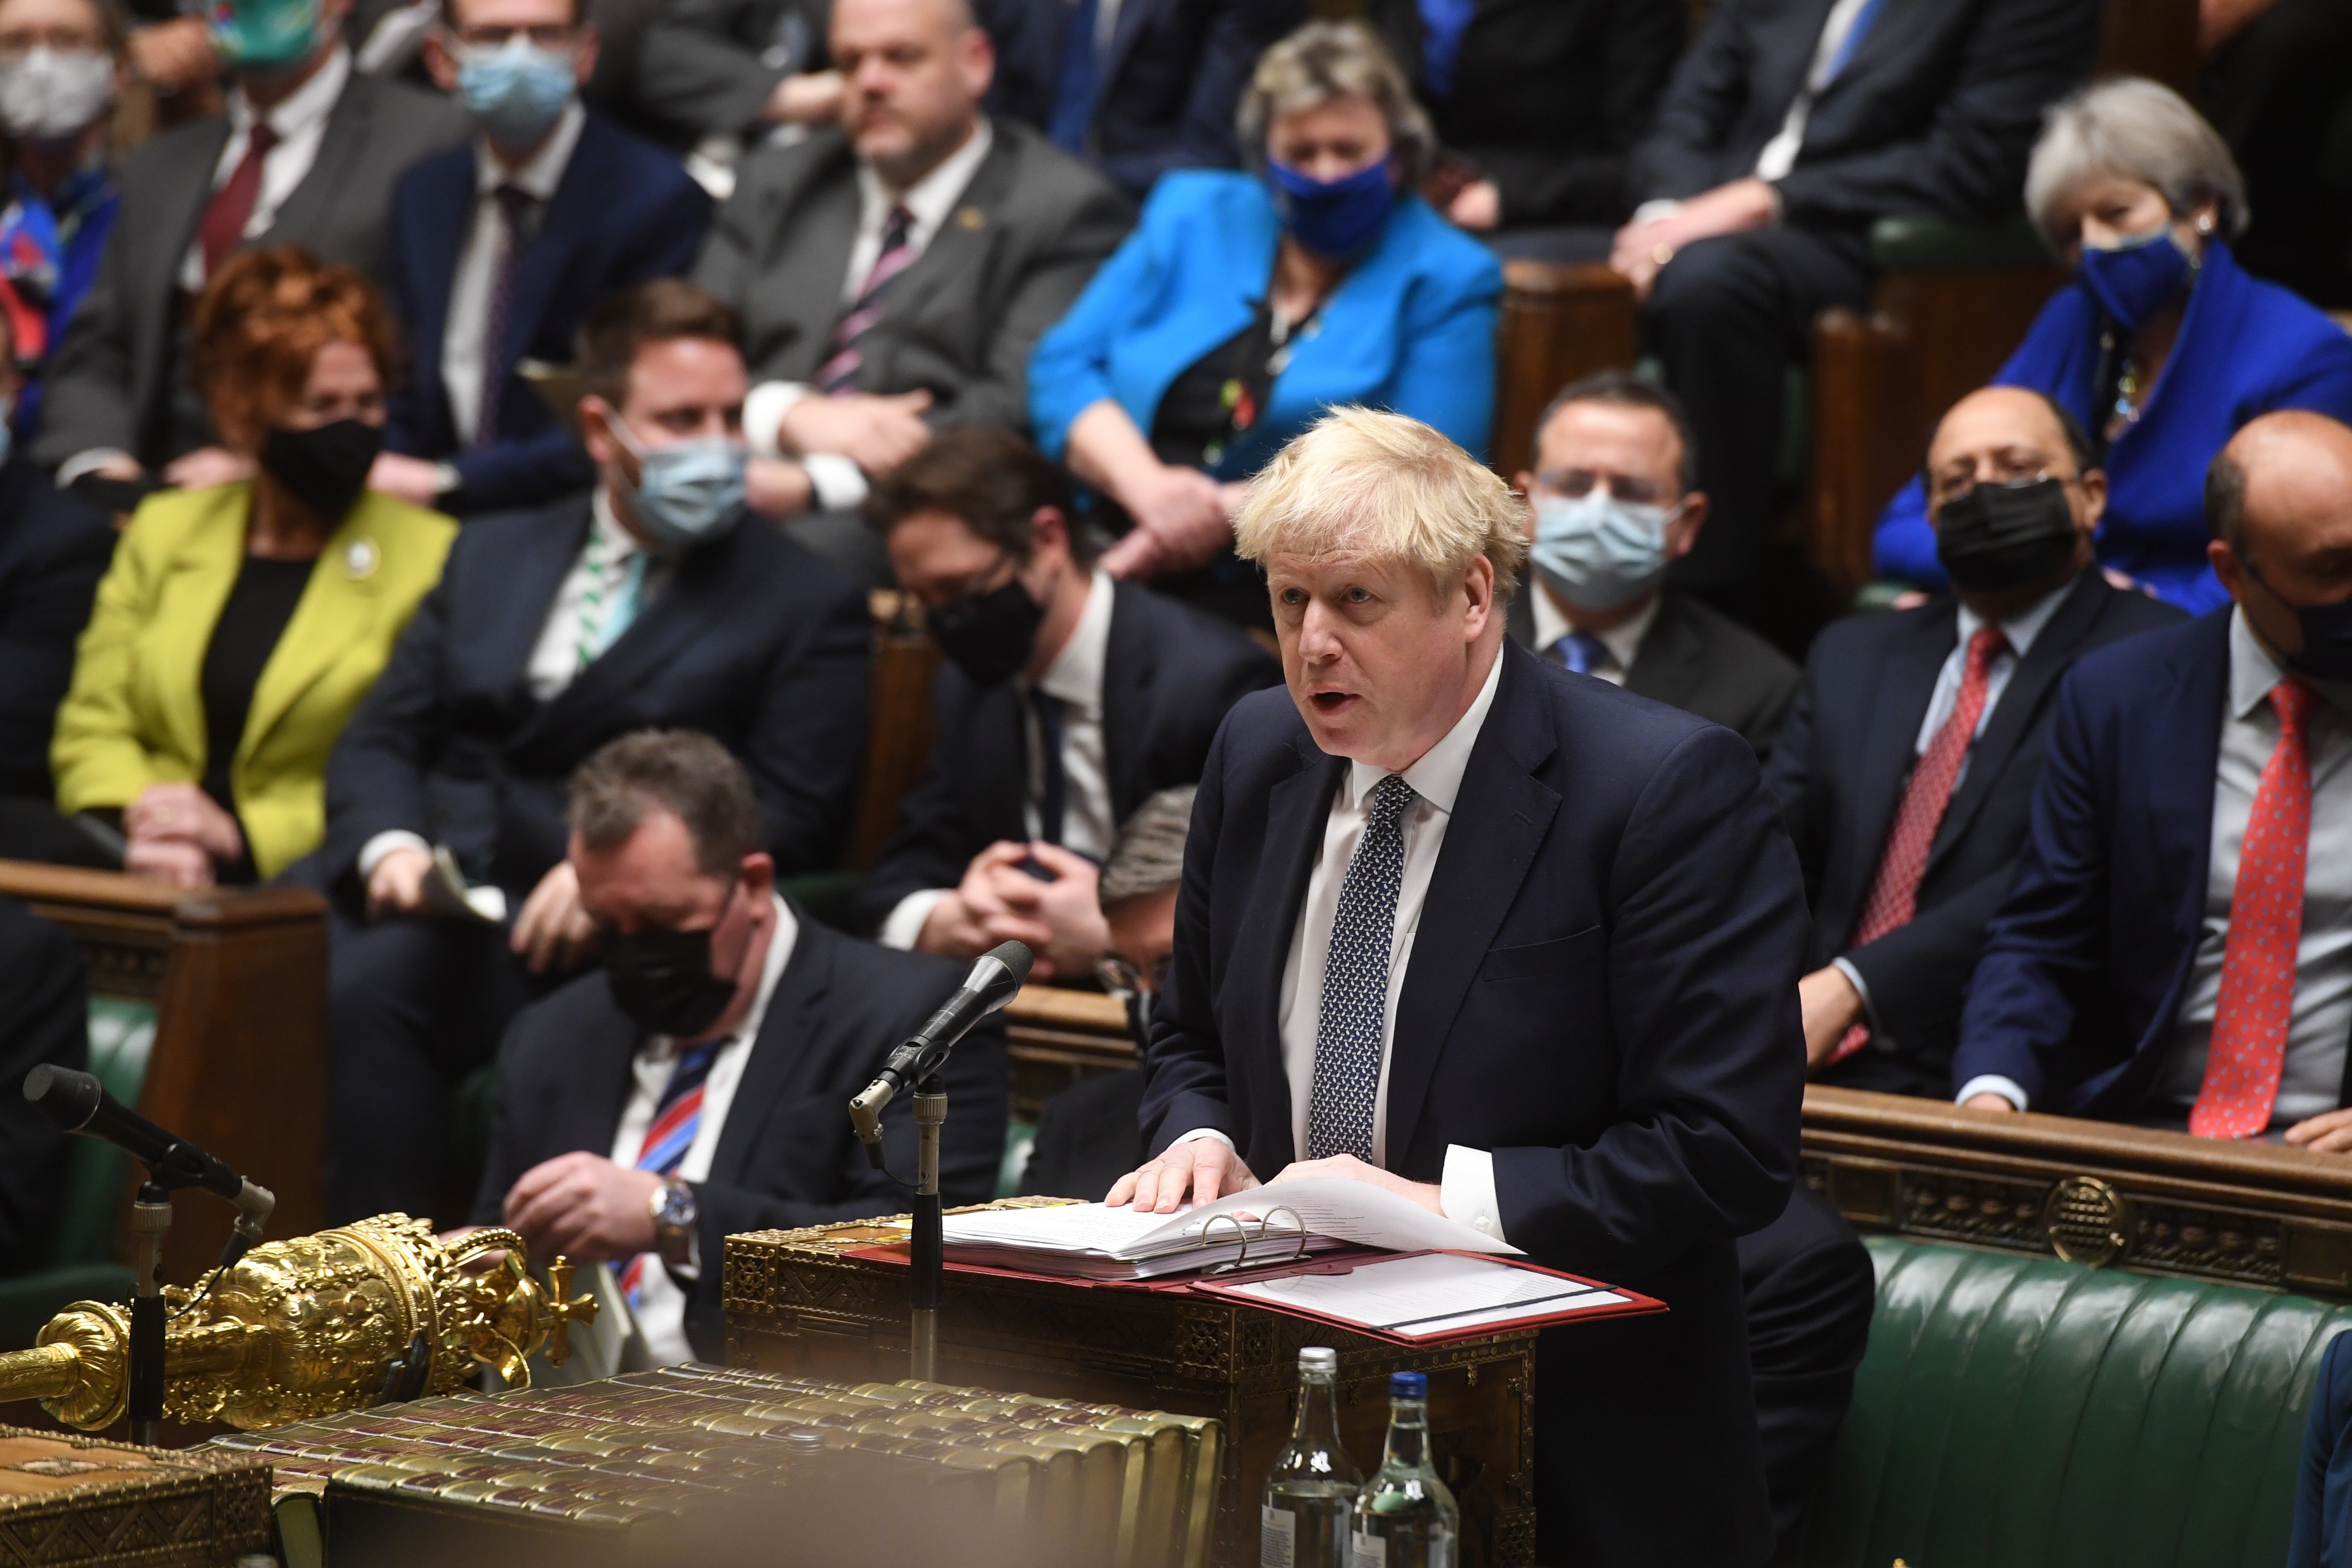 Boris Johnson has apologised to MPs over attending a party at Downing Street in May 2020